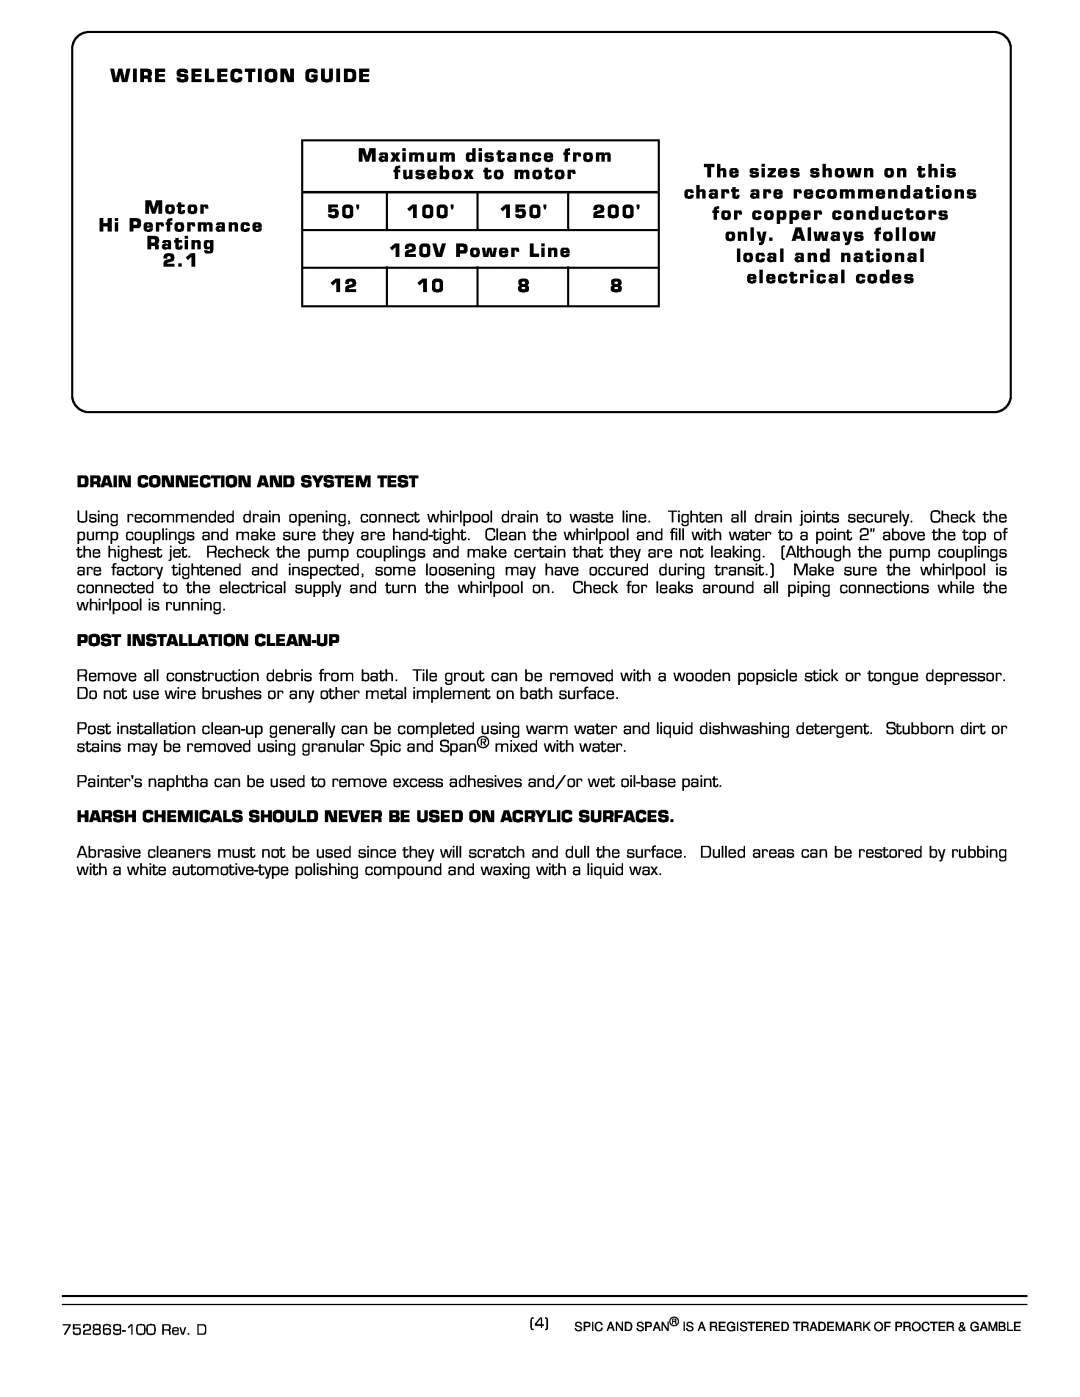 American Standard 7236E Series installation instructions Wire Selection Guide 